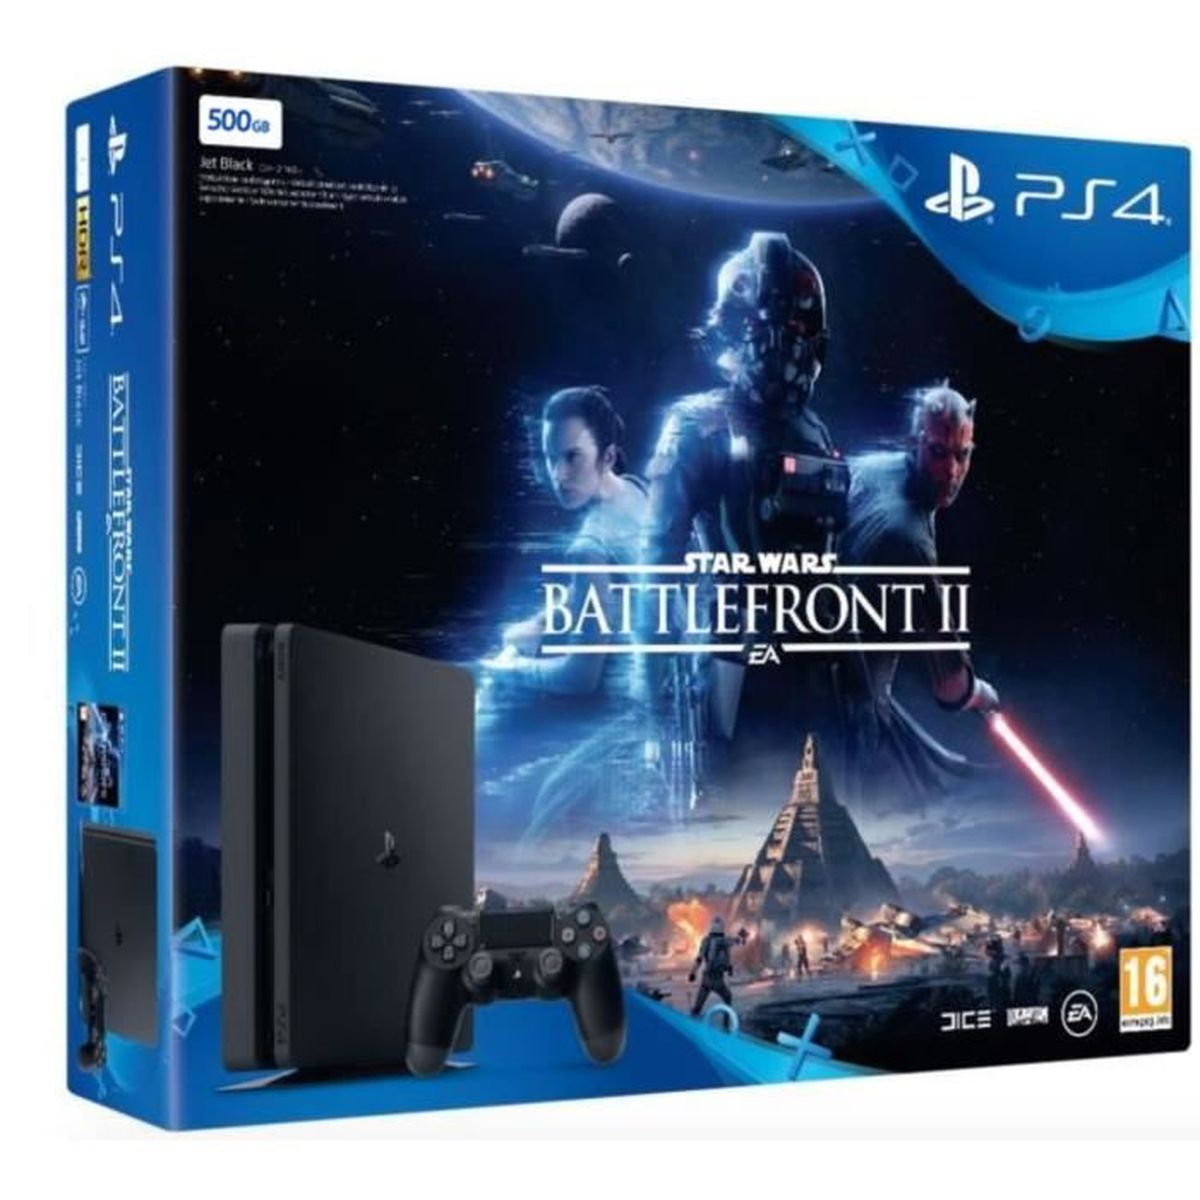 Ps4 старый. Star Wars Battlefront ps4 диск. Battlefront 2 ps4 диск. Star Wars Battlefront II Sony ps4. PLAYSTATION 4 Battlefront 2 Edition.